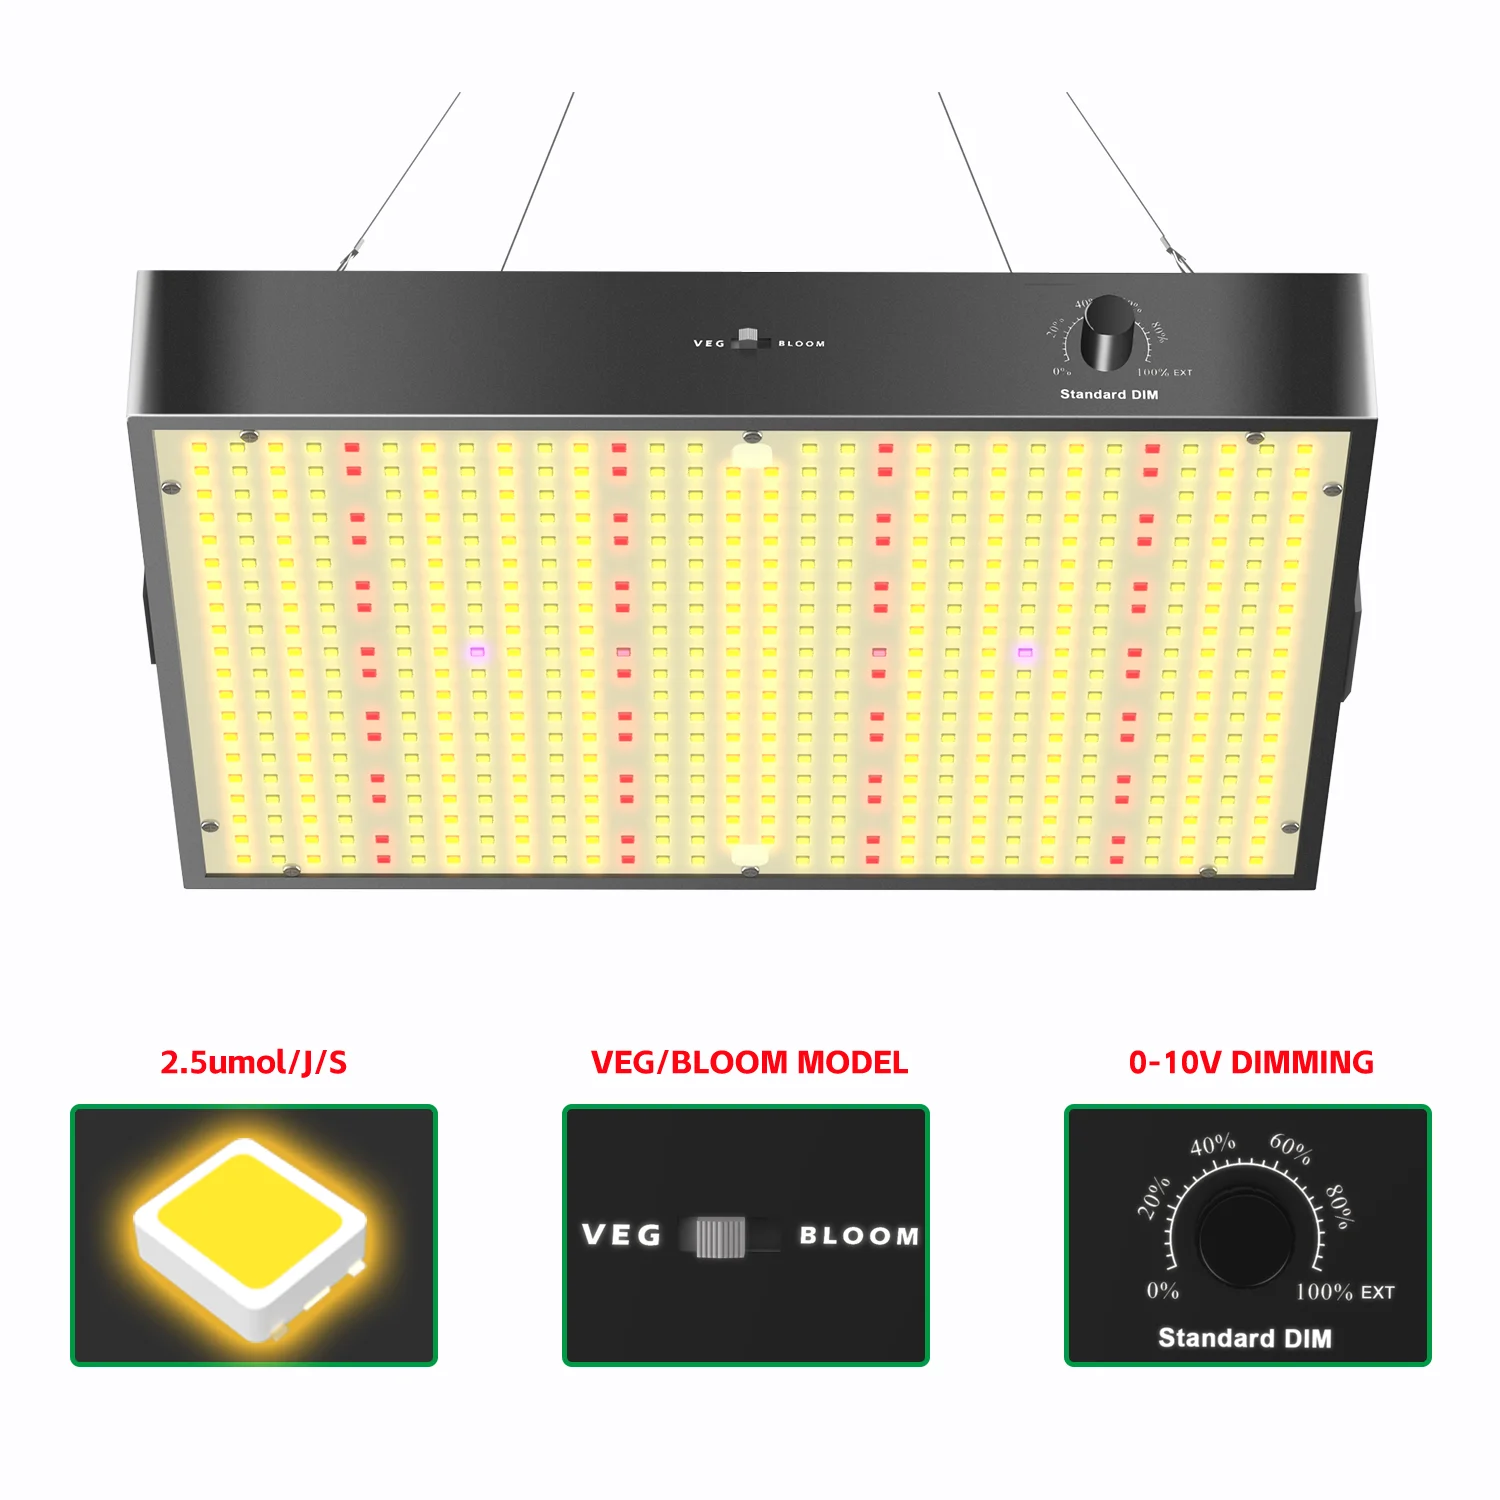 

LED Grow Light Sam-Sung Dimmable 1000W Full Spectrum Grow Light 572PCS LEDs High PPFD For 3x3FT Coverage, Veg and Blooming Model